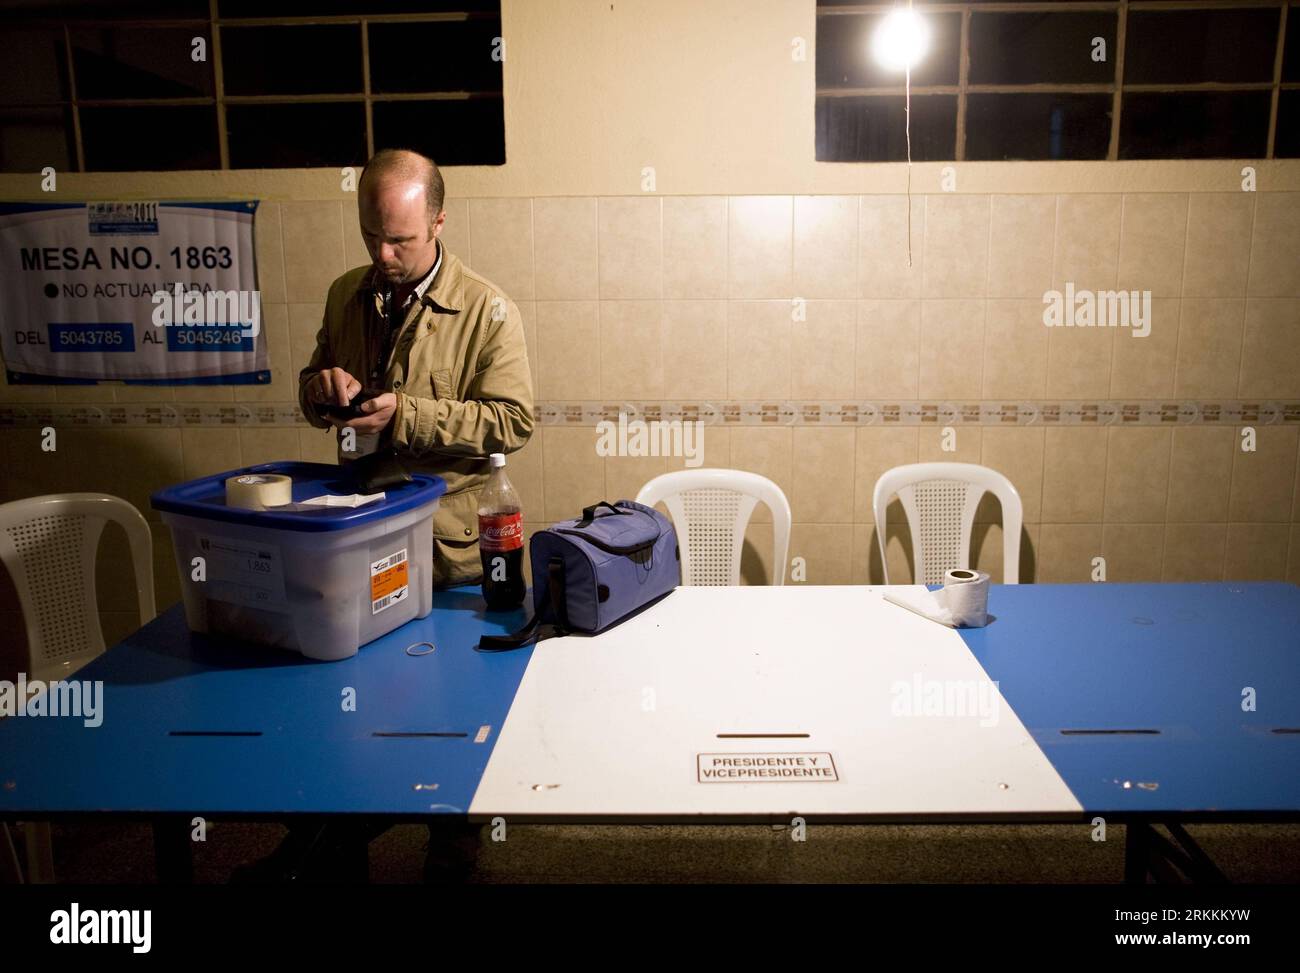 Bildnummer: 56255971  Datum: 06.11.2011  Copyright: imago/Xinhua (111107) -- GUATEMALA CITY, Nov. 7, 2011 (Xinhua) -- A poll officer prepares to leave after counting votes in Guatemala City, capital of Guatemala, on Nov. 6, 2011. Citizens voted during the second round of presidential elections in which Otto Perez Molina, candidate of Guatemala s Patriot Party, has won the country s presidential run-off elections, according to the electoral commission. (Xinhua/Guillermo Arias) (ctt) GUATEMALA-GUATEMALA CITY-PESIDENTIAL ELECTION PUBLICATIONxNOTxINxCHN Politik Wahl Präsidentschaftswahl Wahllokal Stock Photo